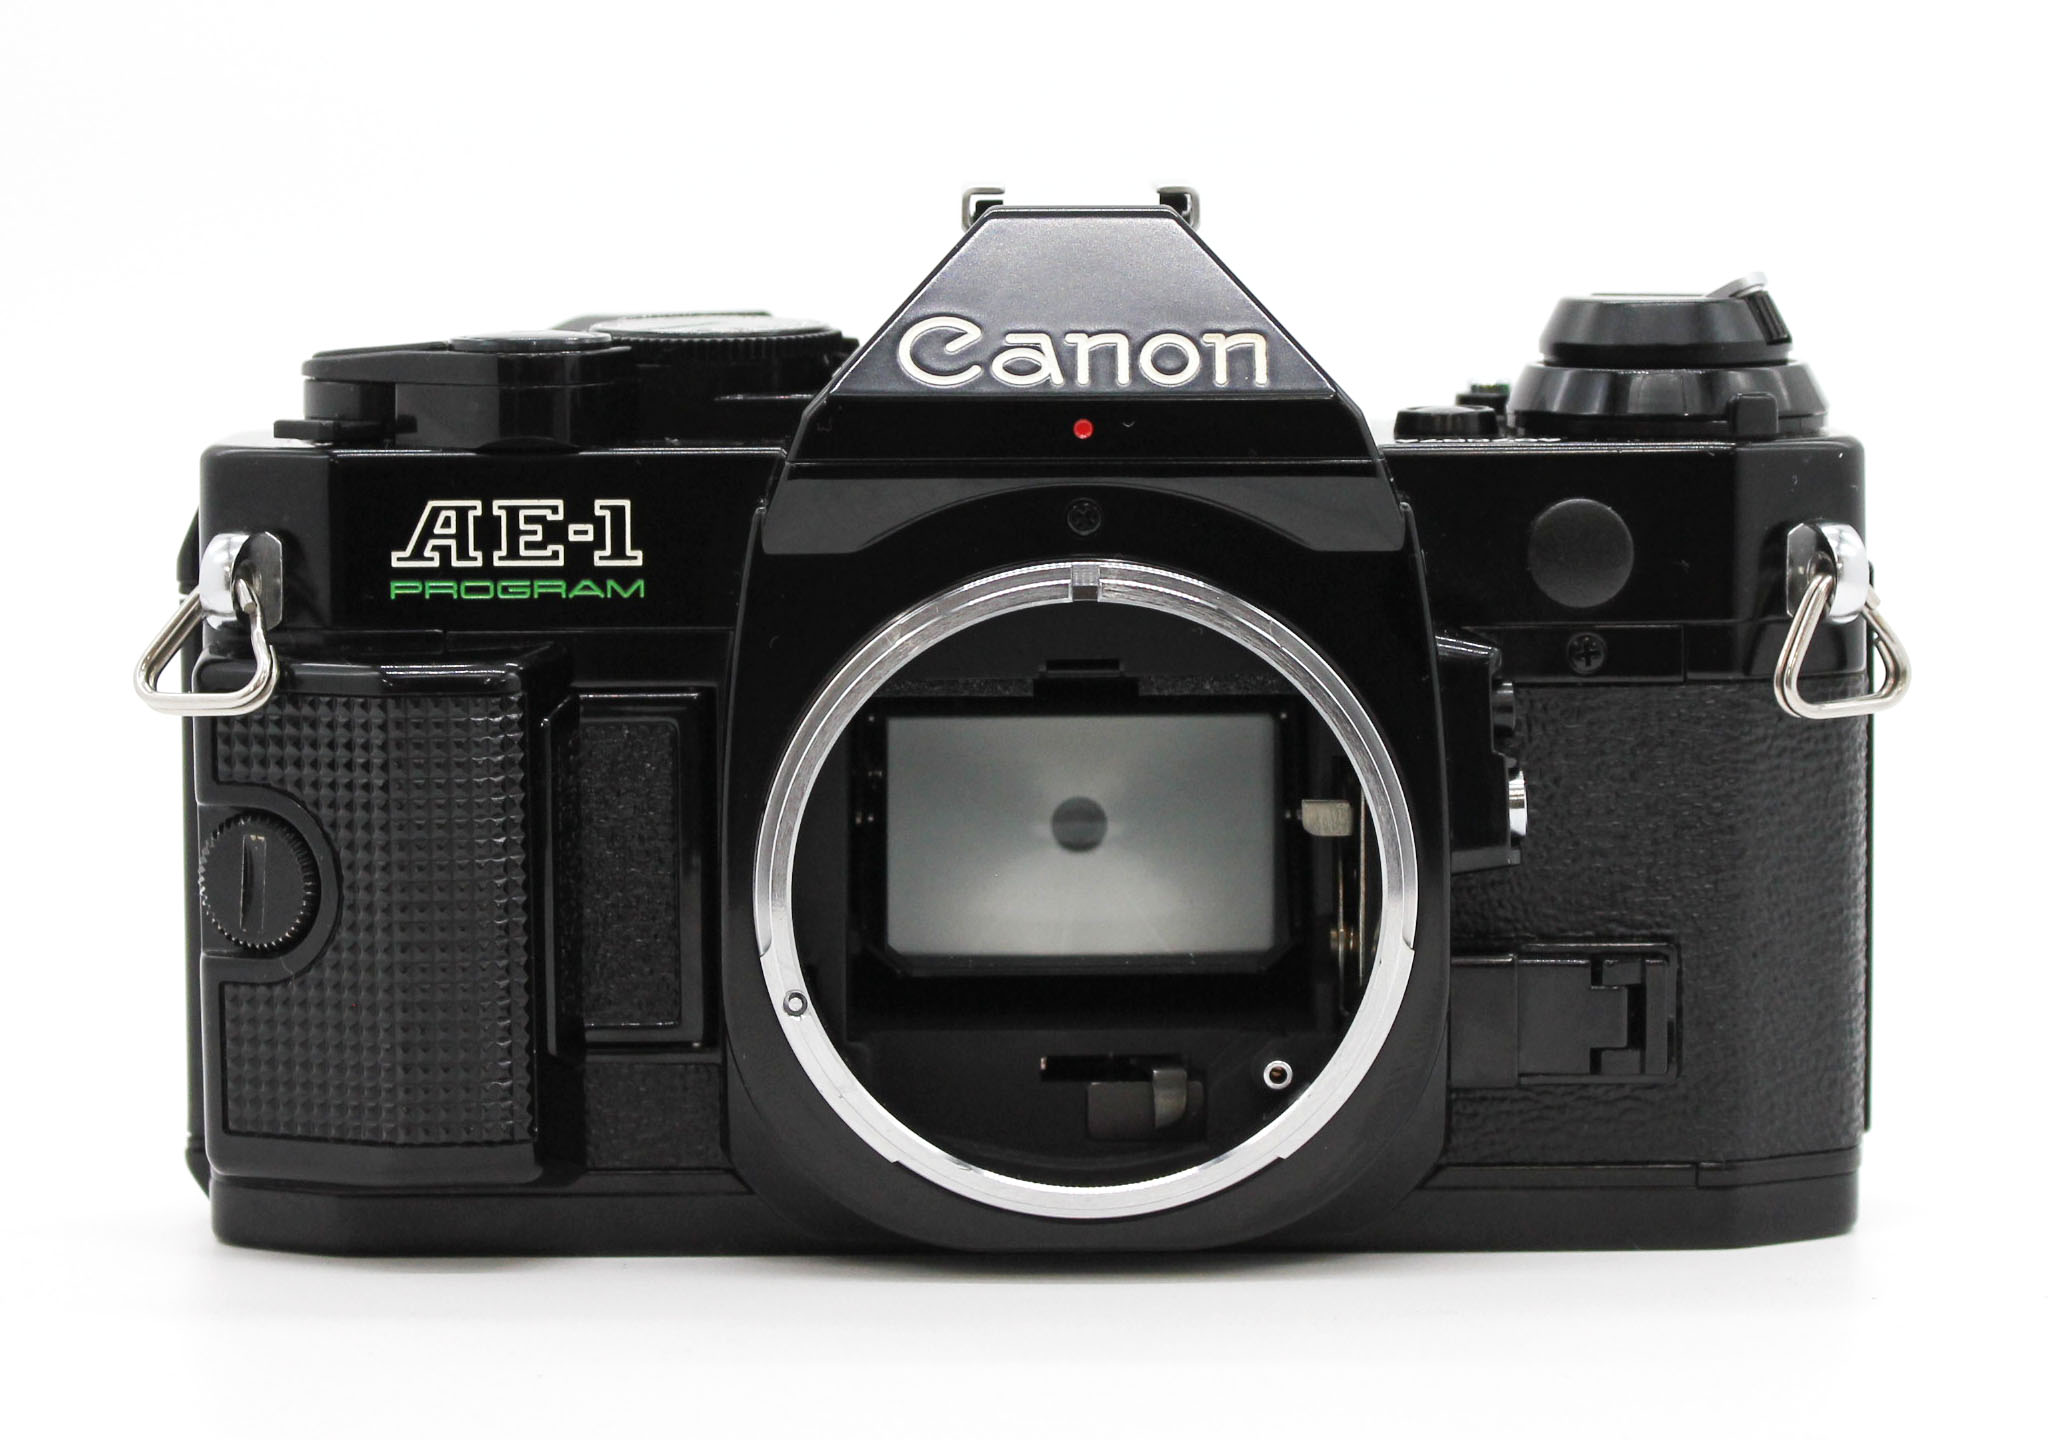 Canon AE-1 Program 35mm SLR Film Camera Black with New FD 50mm F/1.4 Lens from Japan Photo 3